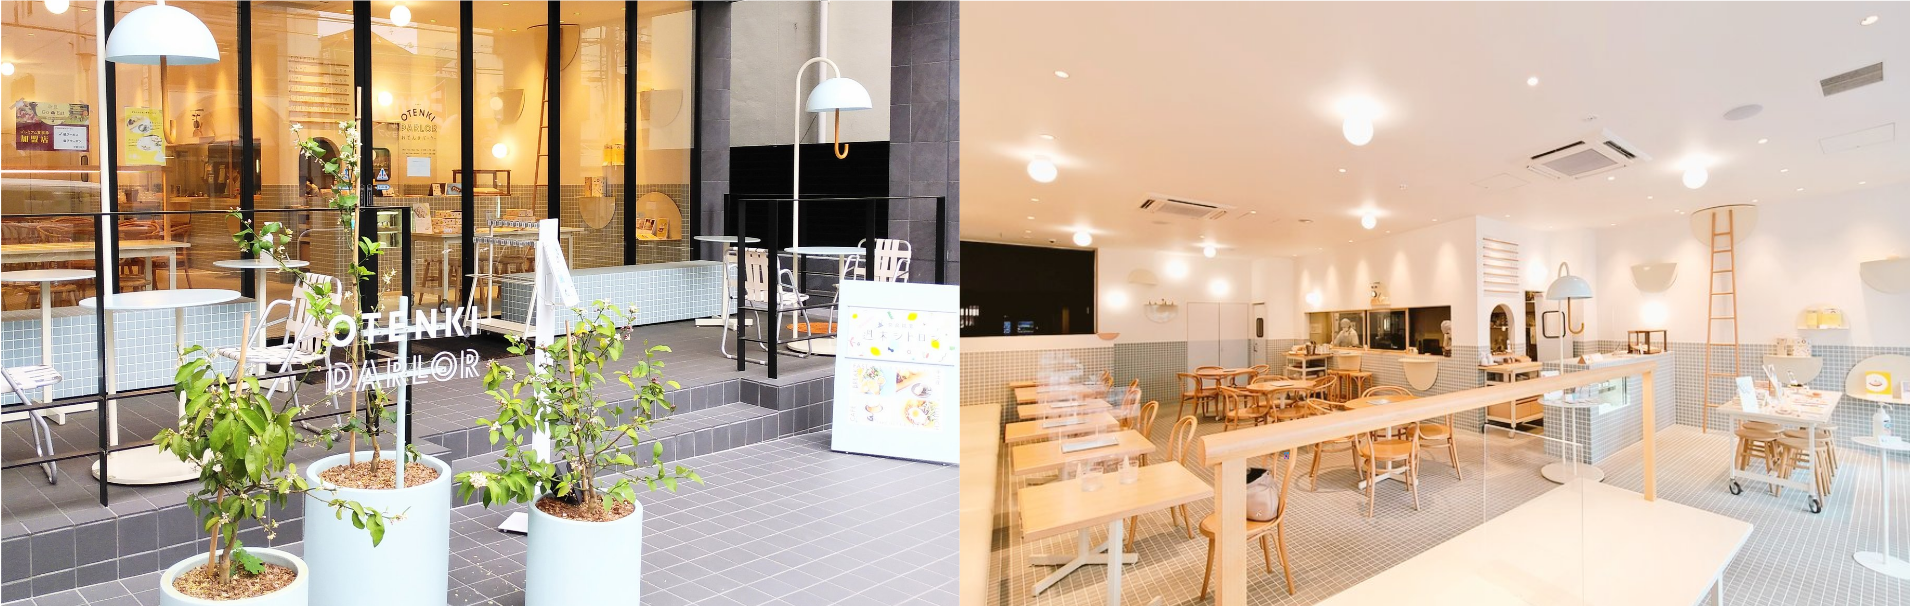 Otenki Parlour - collage of cafe interior and exterior